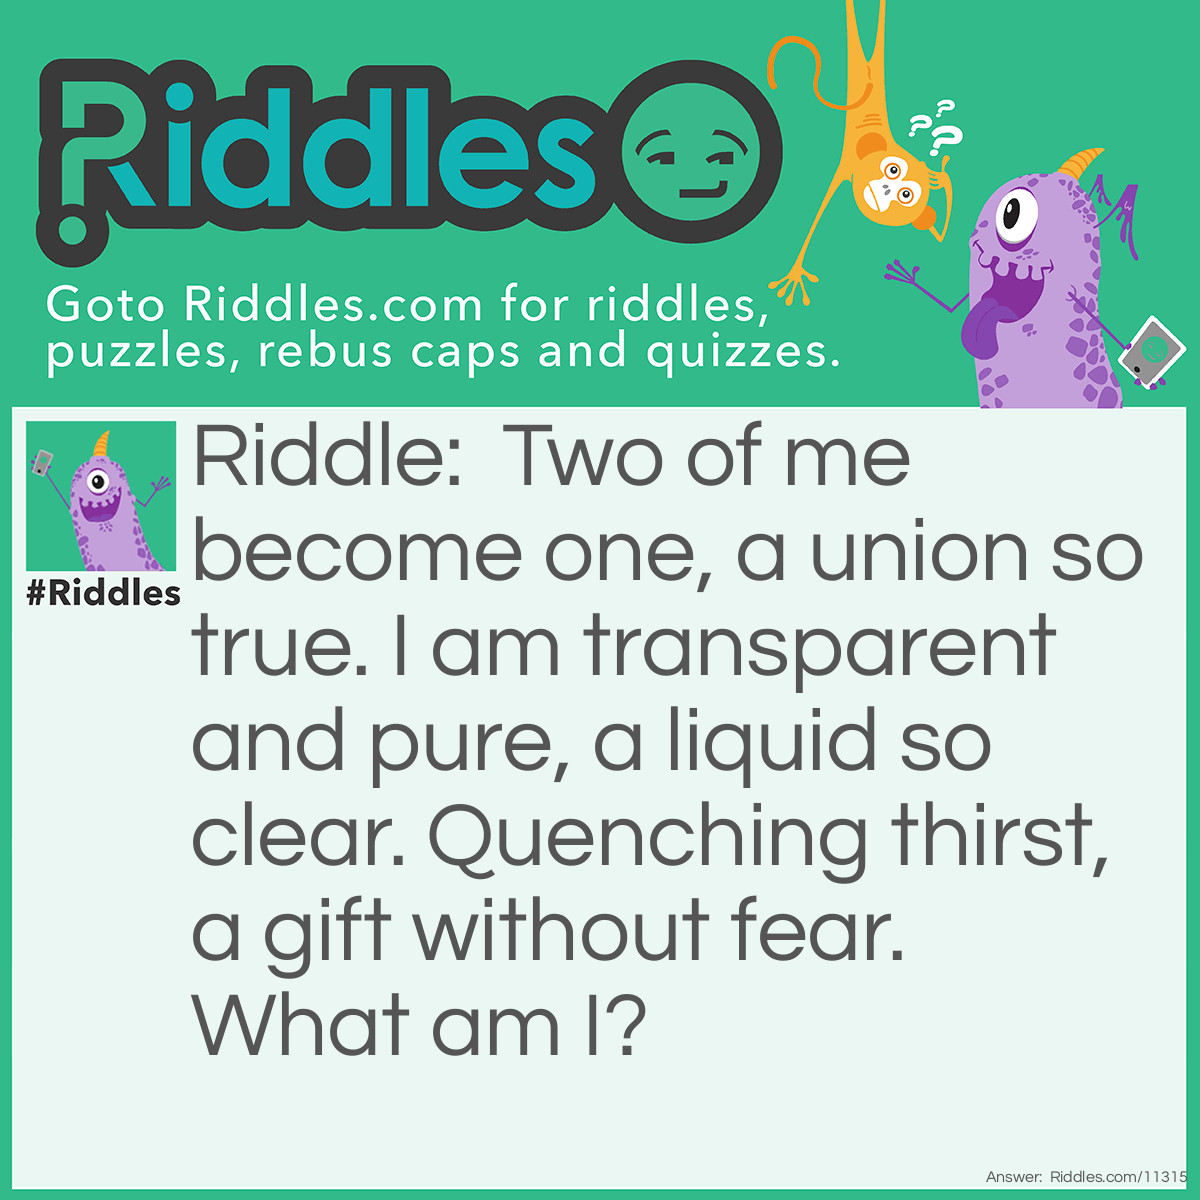 Riddle: Two of me become one, a union so true. I am transparent and pure, a liquid so clear. Quenching thirst, a gift without fear. What am I? Answer: A water drop.